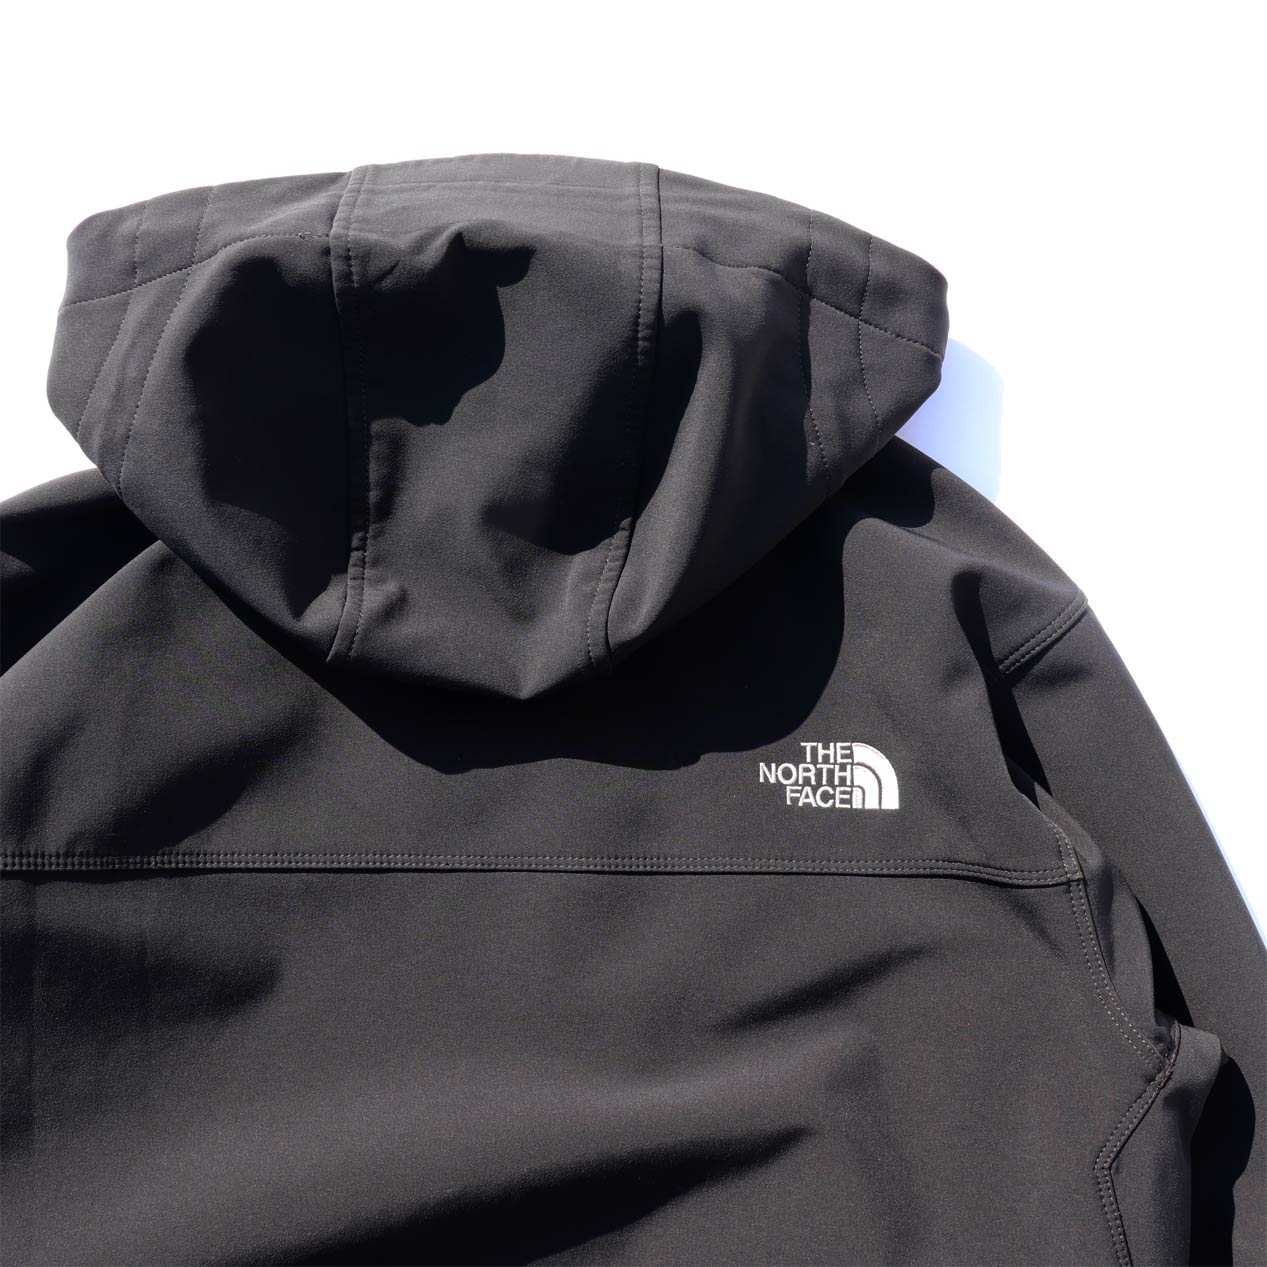 POST JUNK / 00's THE NORTH FACE SUMMIT SERIES APEX ソフトシェル 